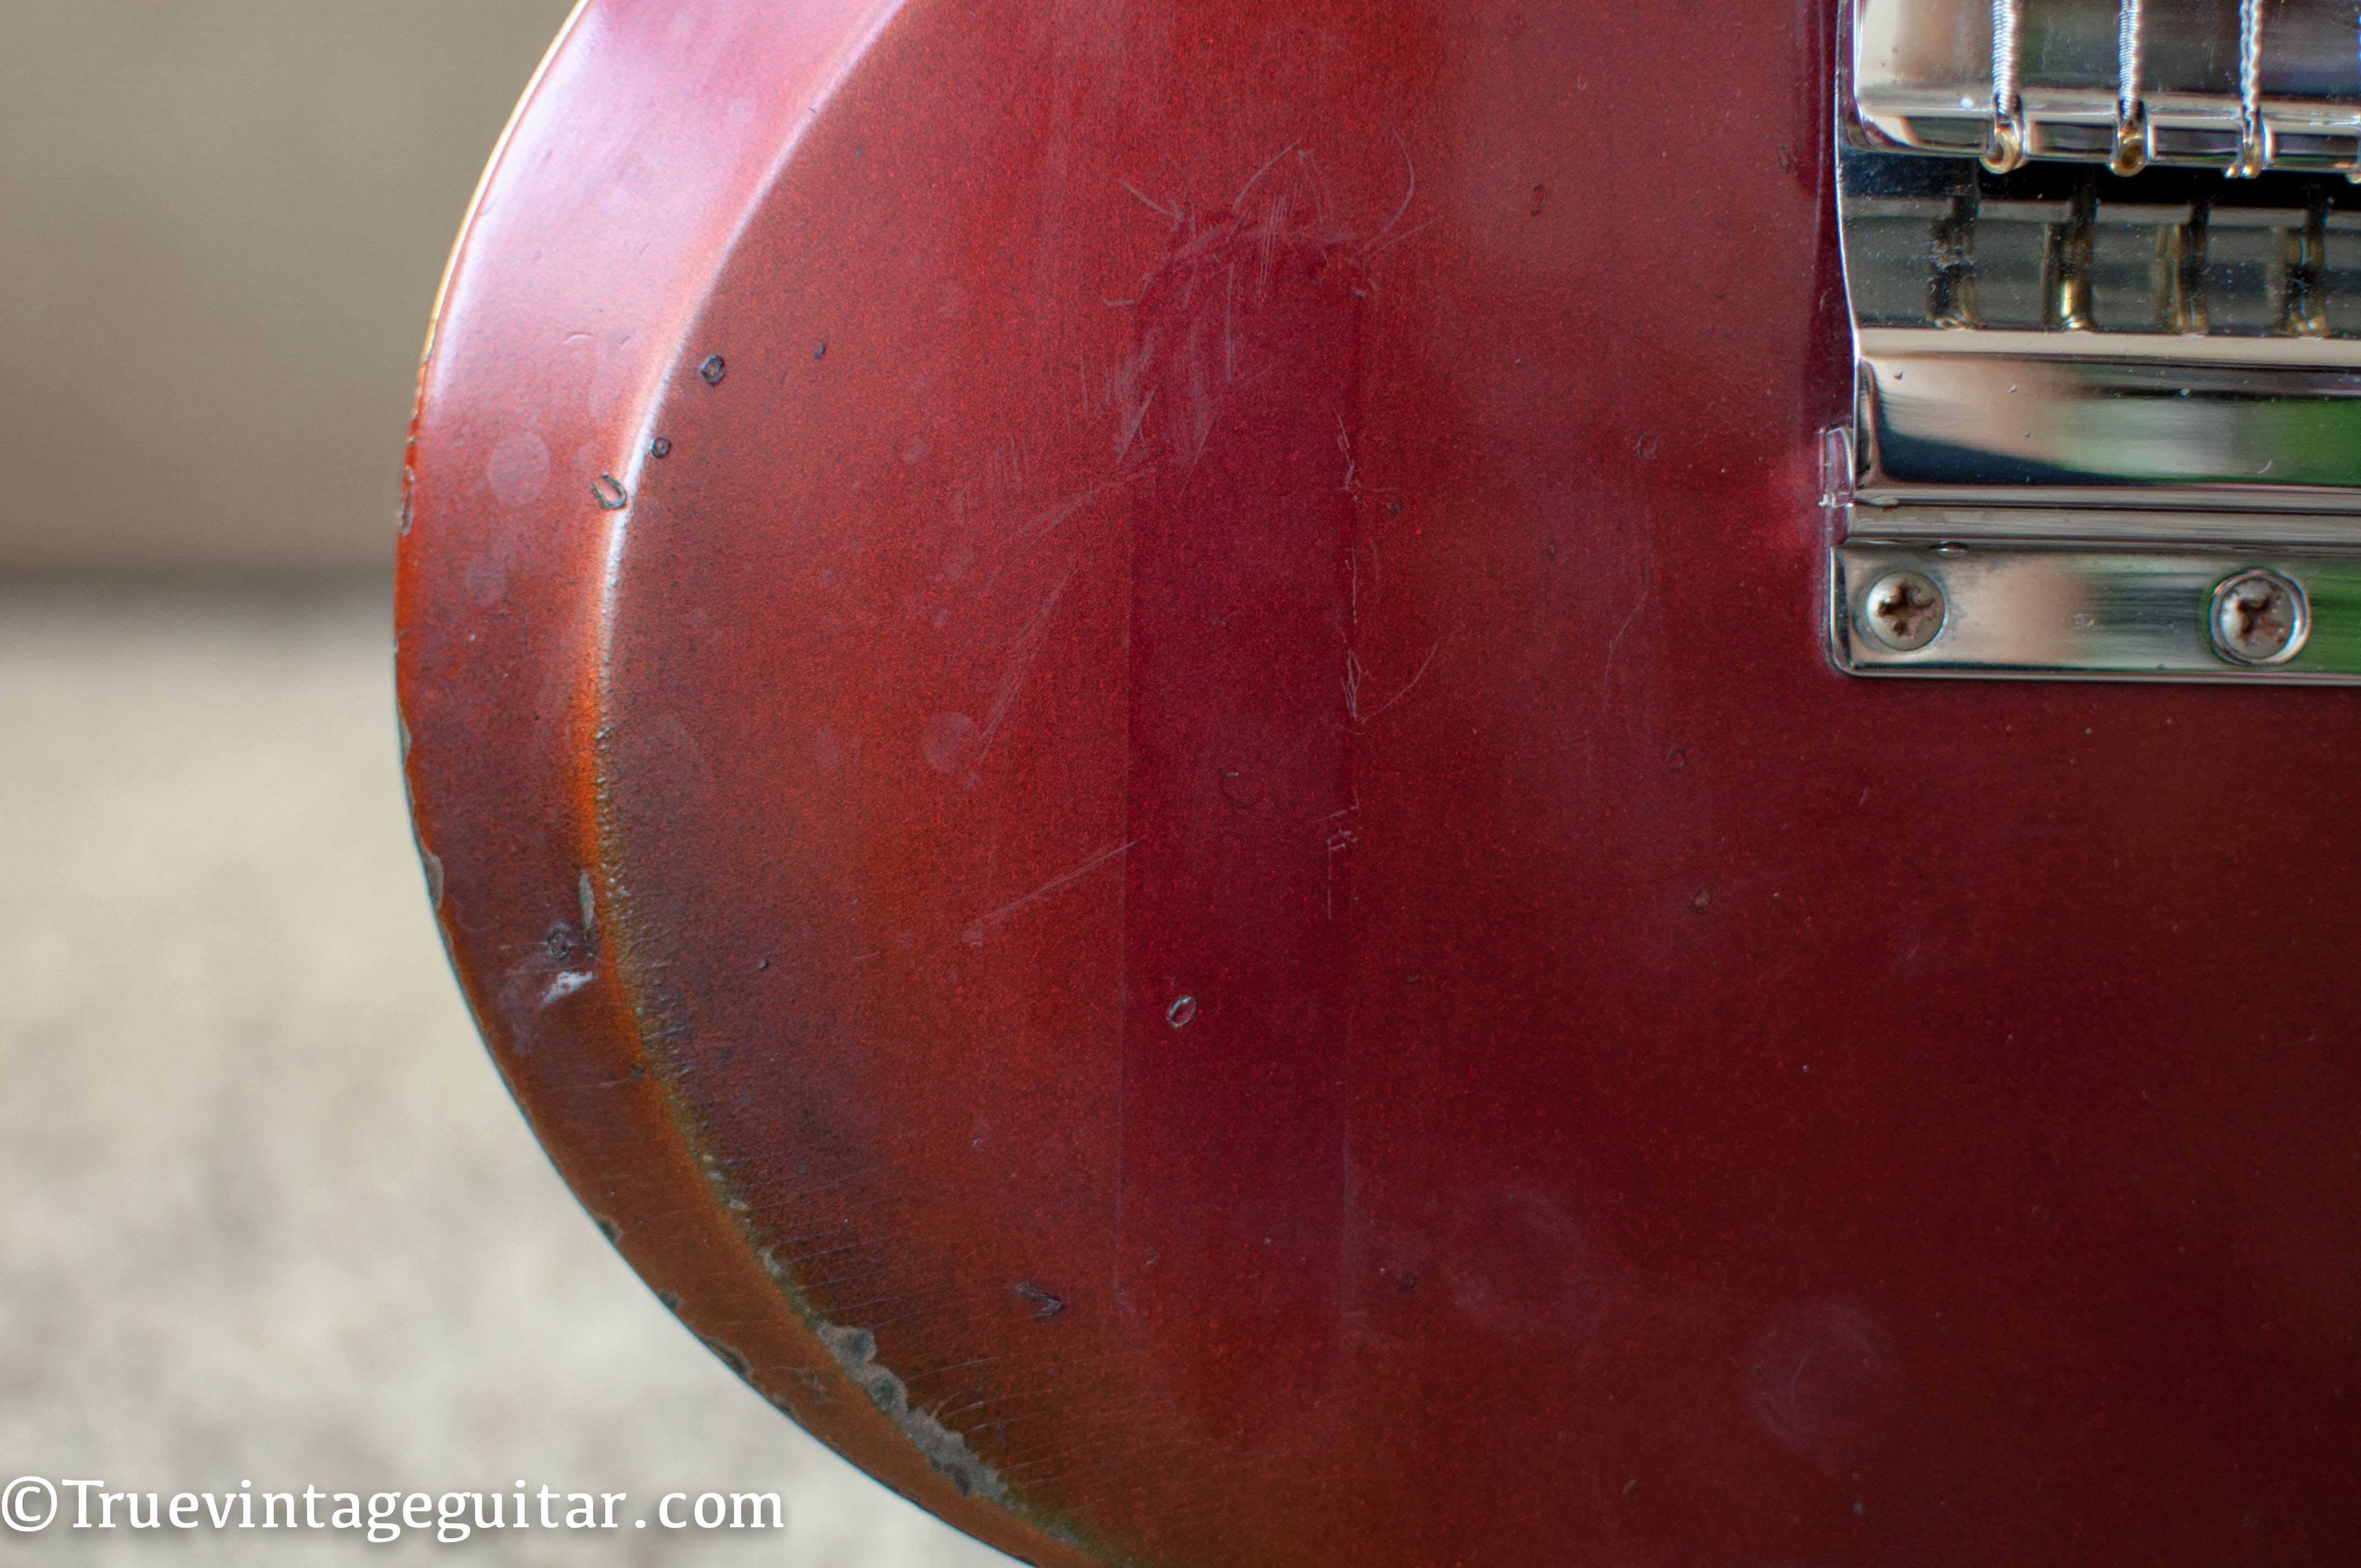 Sparkling Burgundy red metallic color 1960s Gibson electric guitar